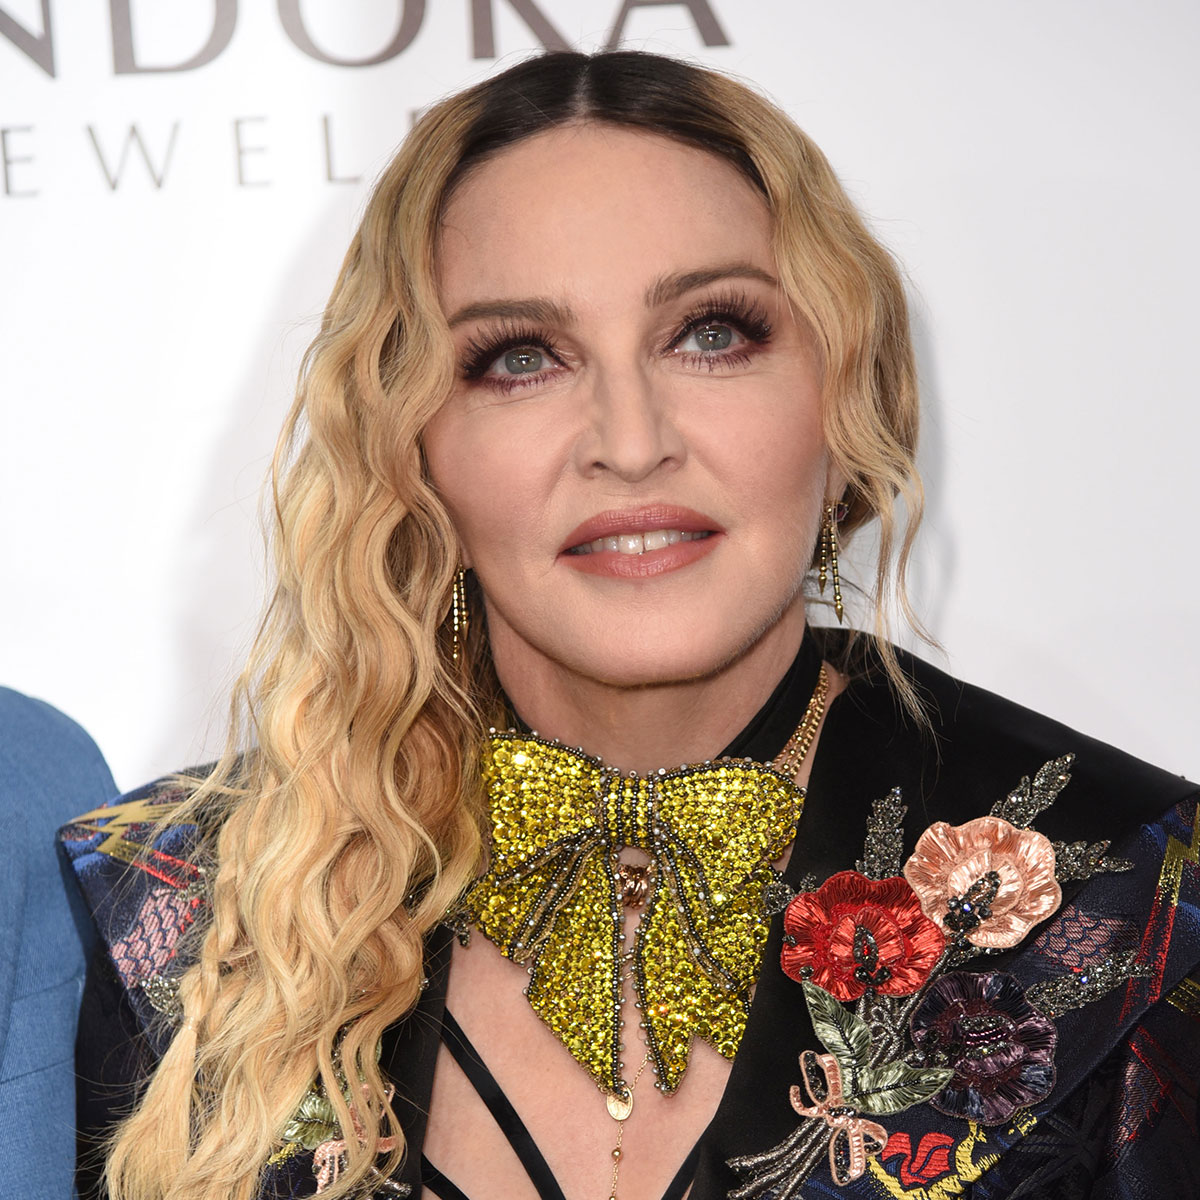 Fans Think Madonna Looks Unrecognizable During Outing With Julia Garner -  SHEfinds